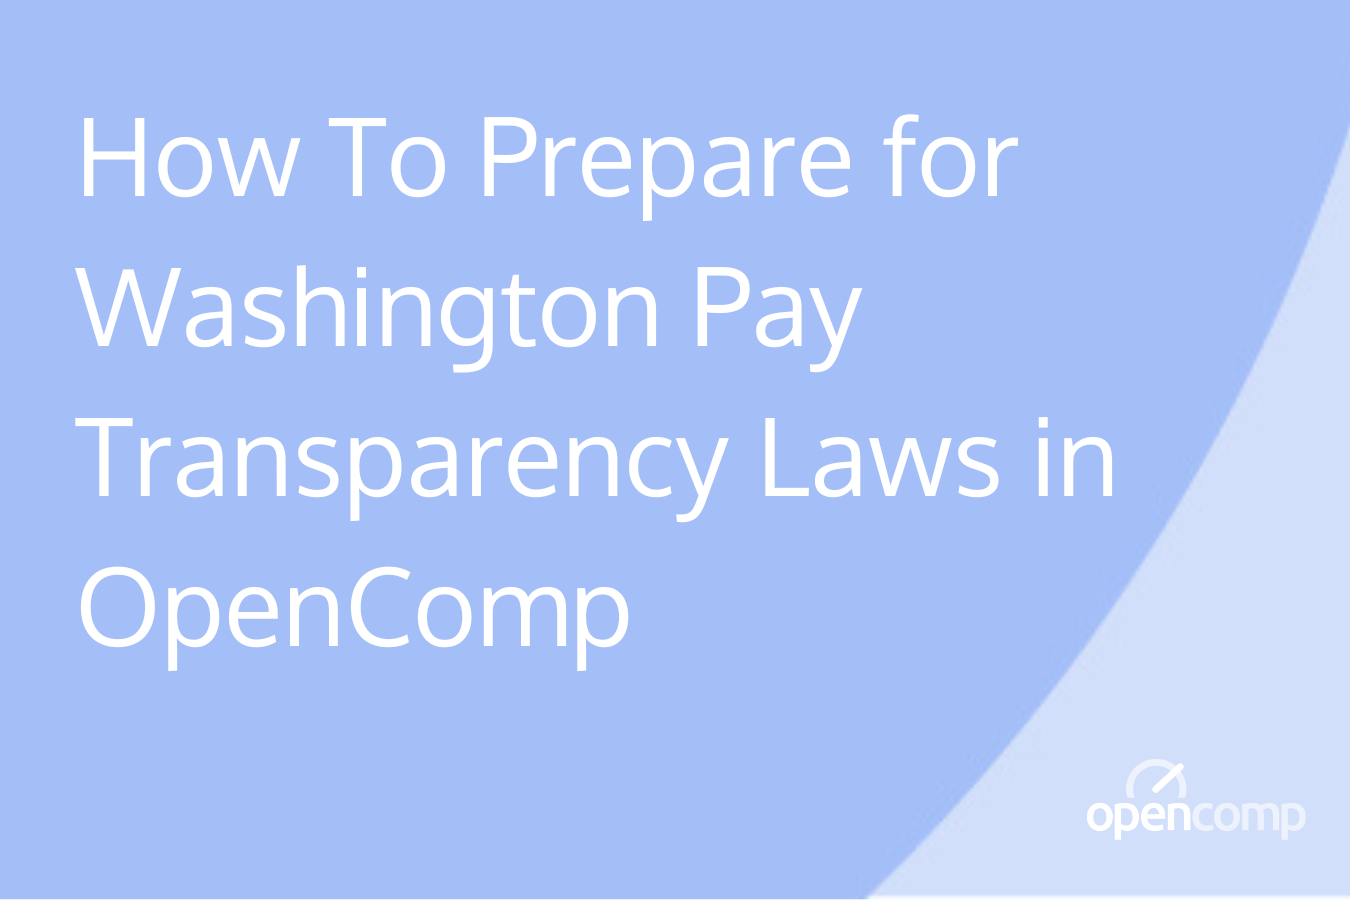 How To Prepare for Washington Pay Transparency Laws in OpenComp-1